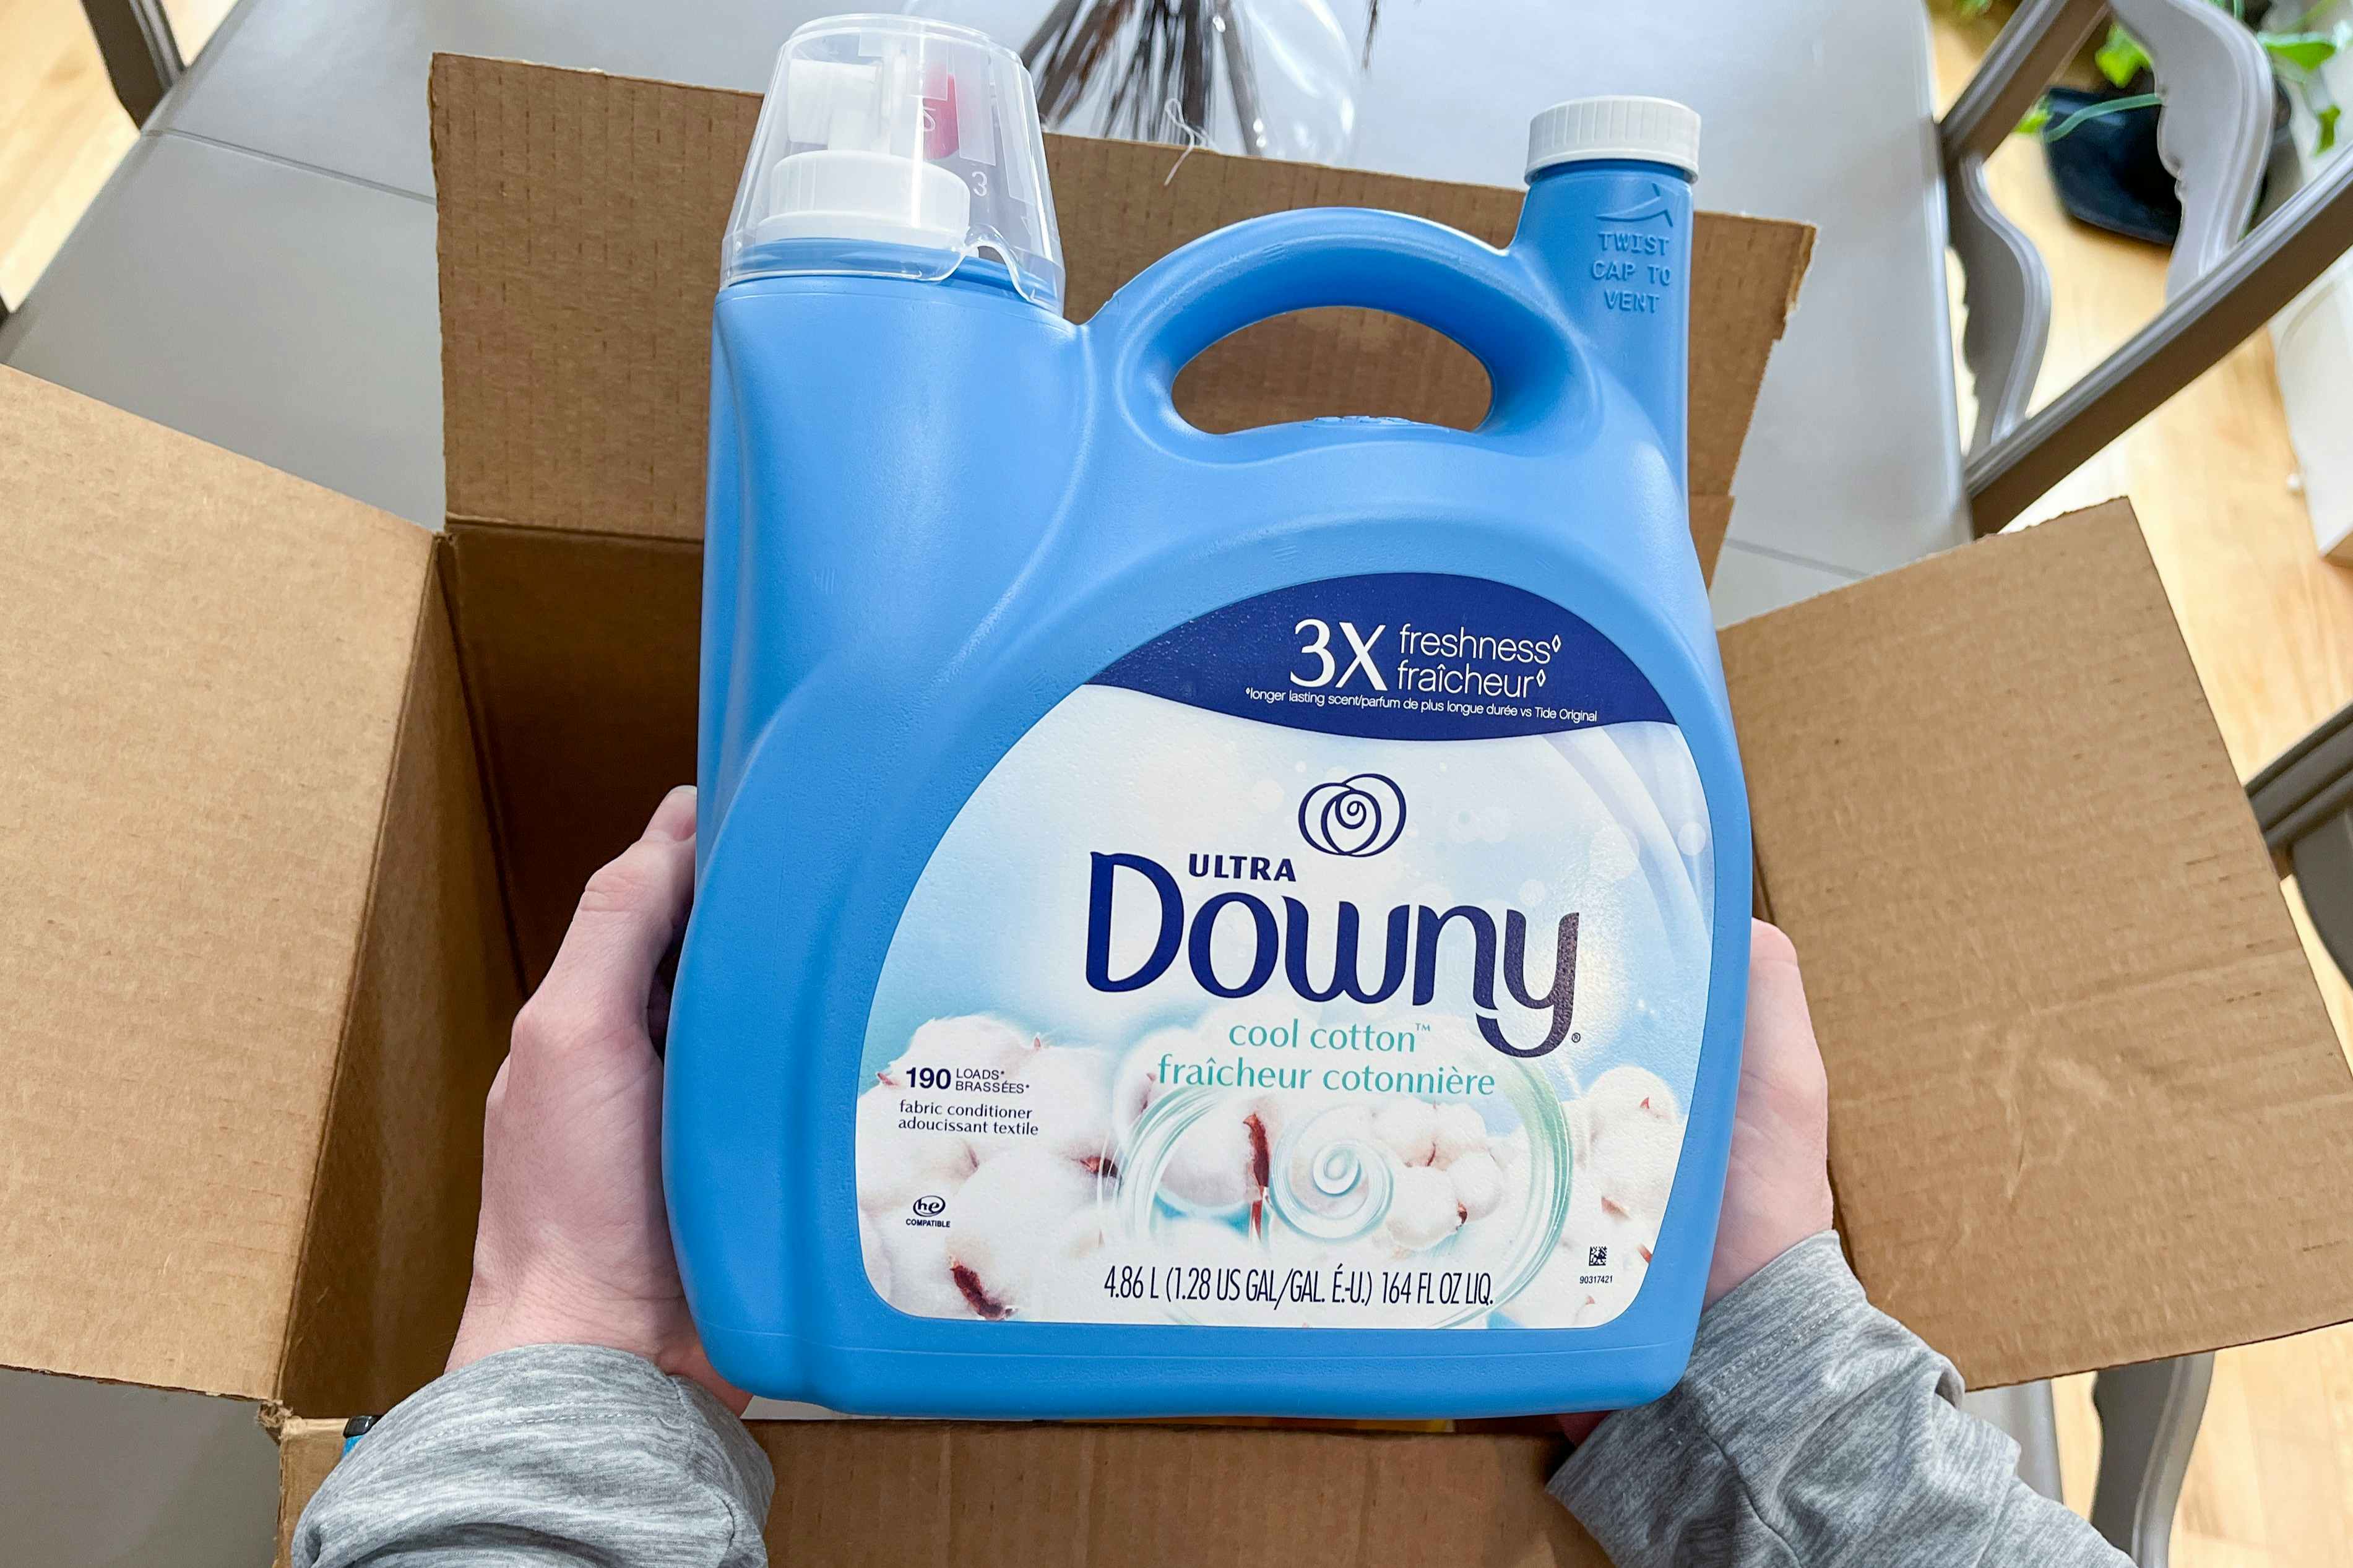 Downy Fabric Softener, as Low as $7.81 per Bottle on Amazon